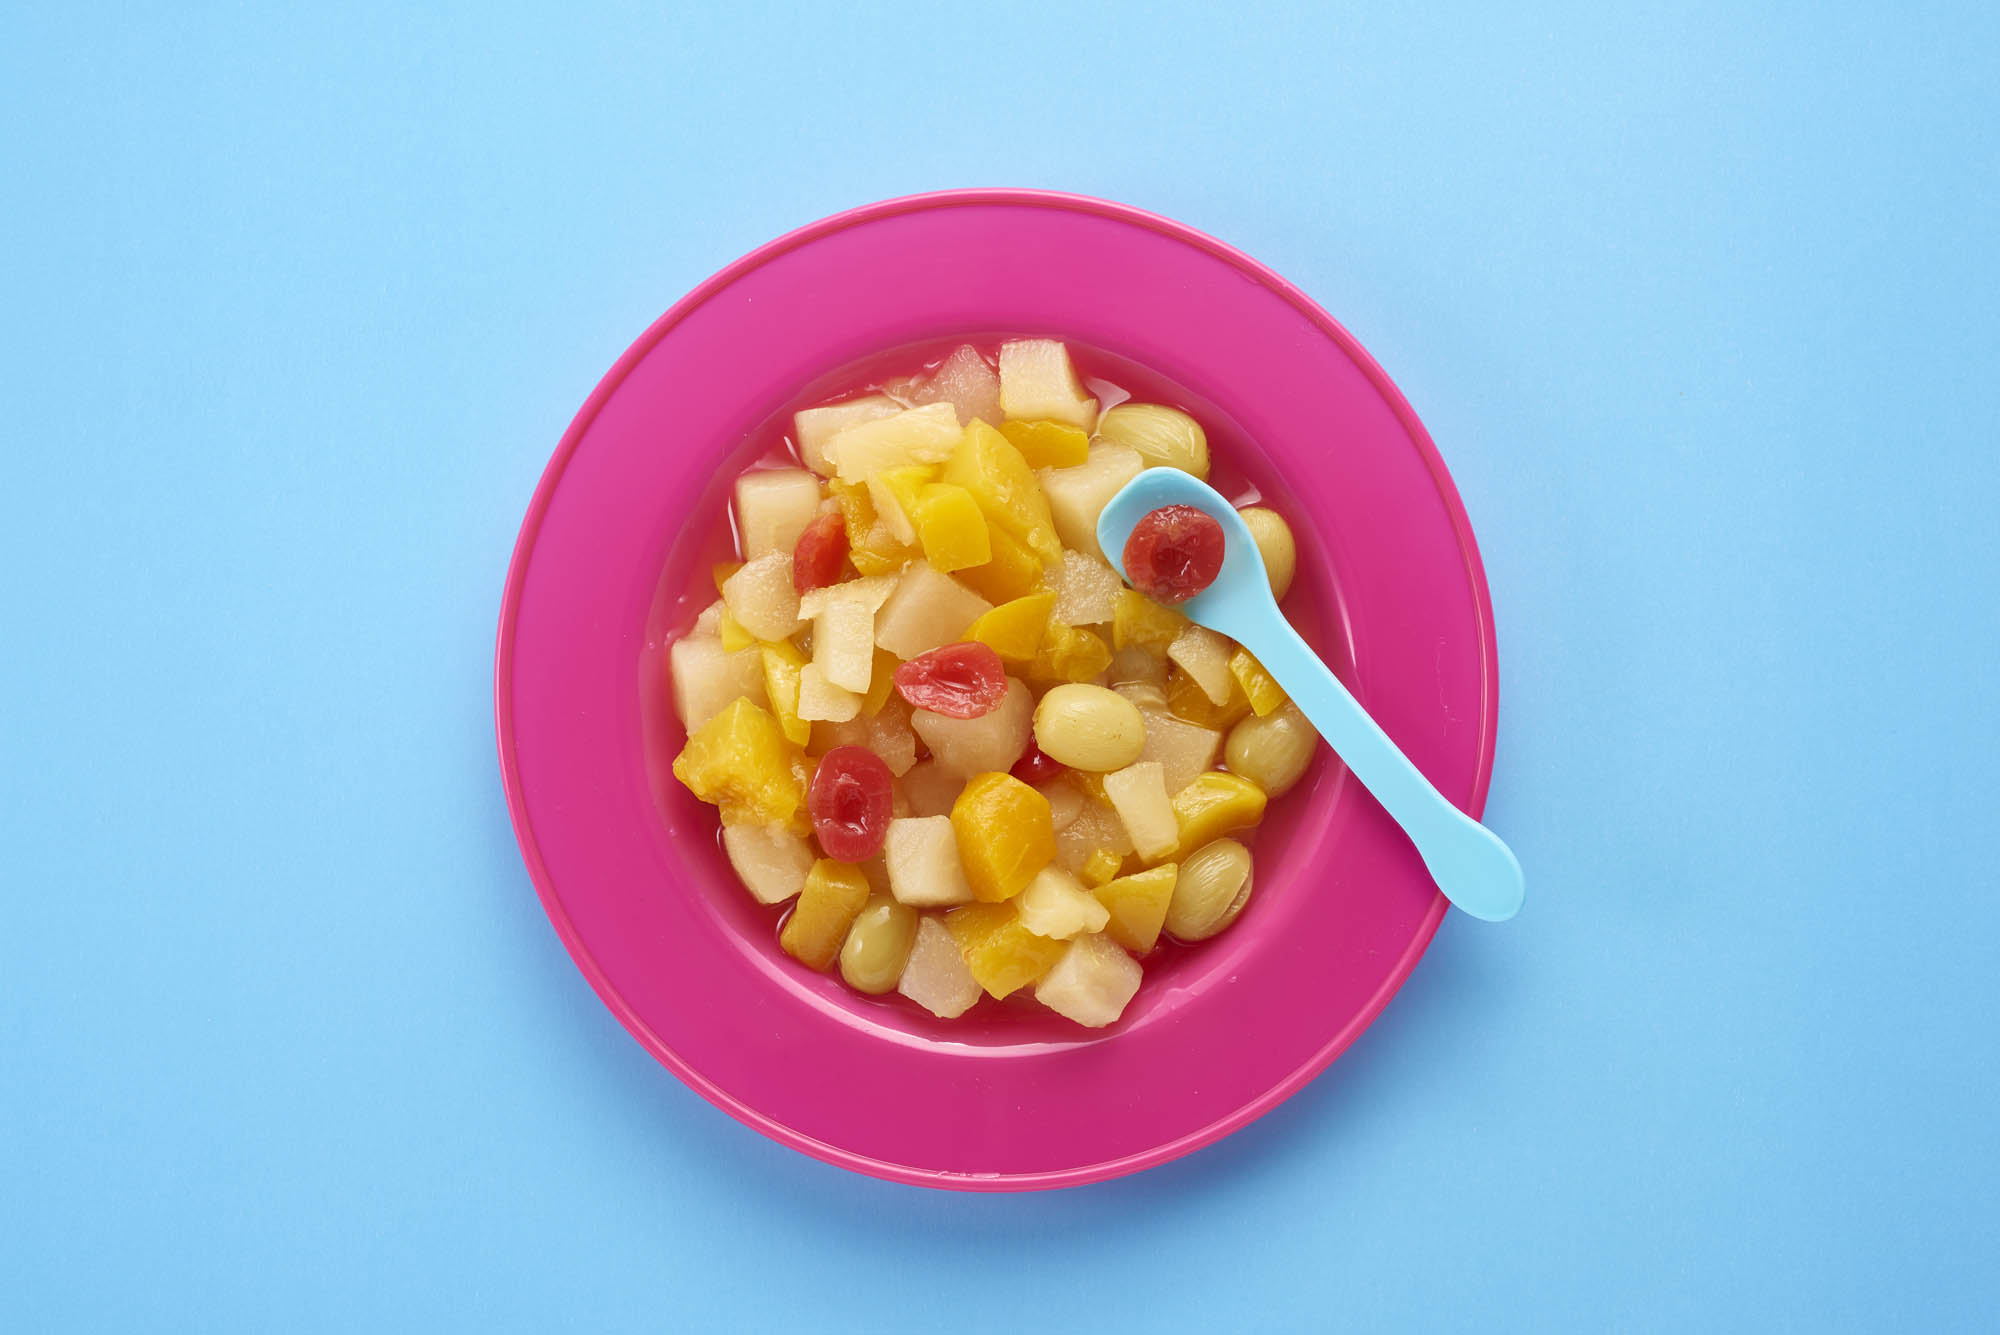 Canned Fruit Salad on Plate